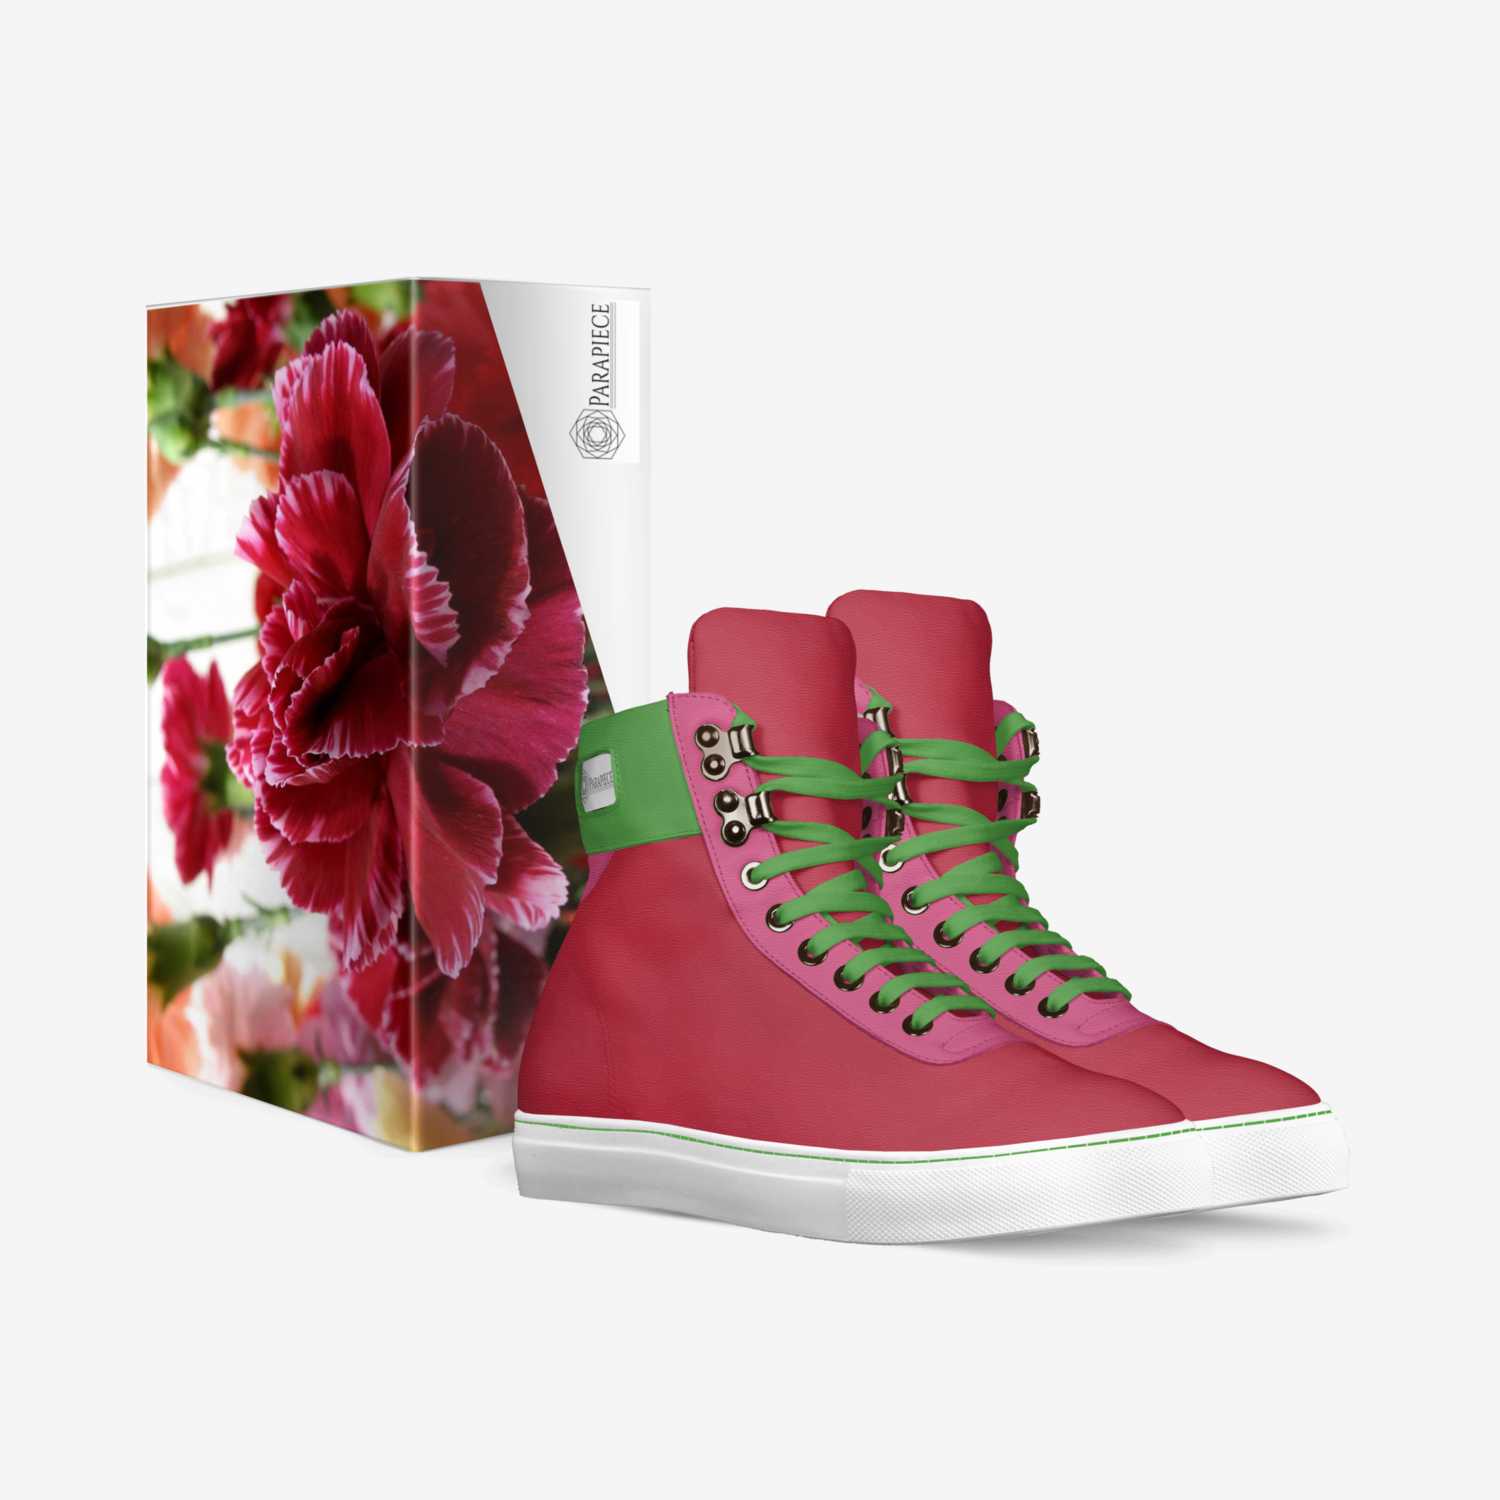 Carnation custom made in Italy shoes by Cathyrose Odoh | Box view